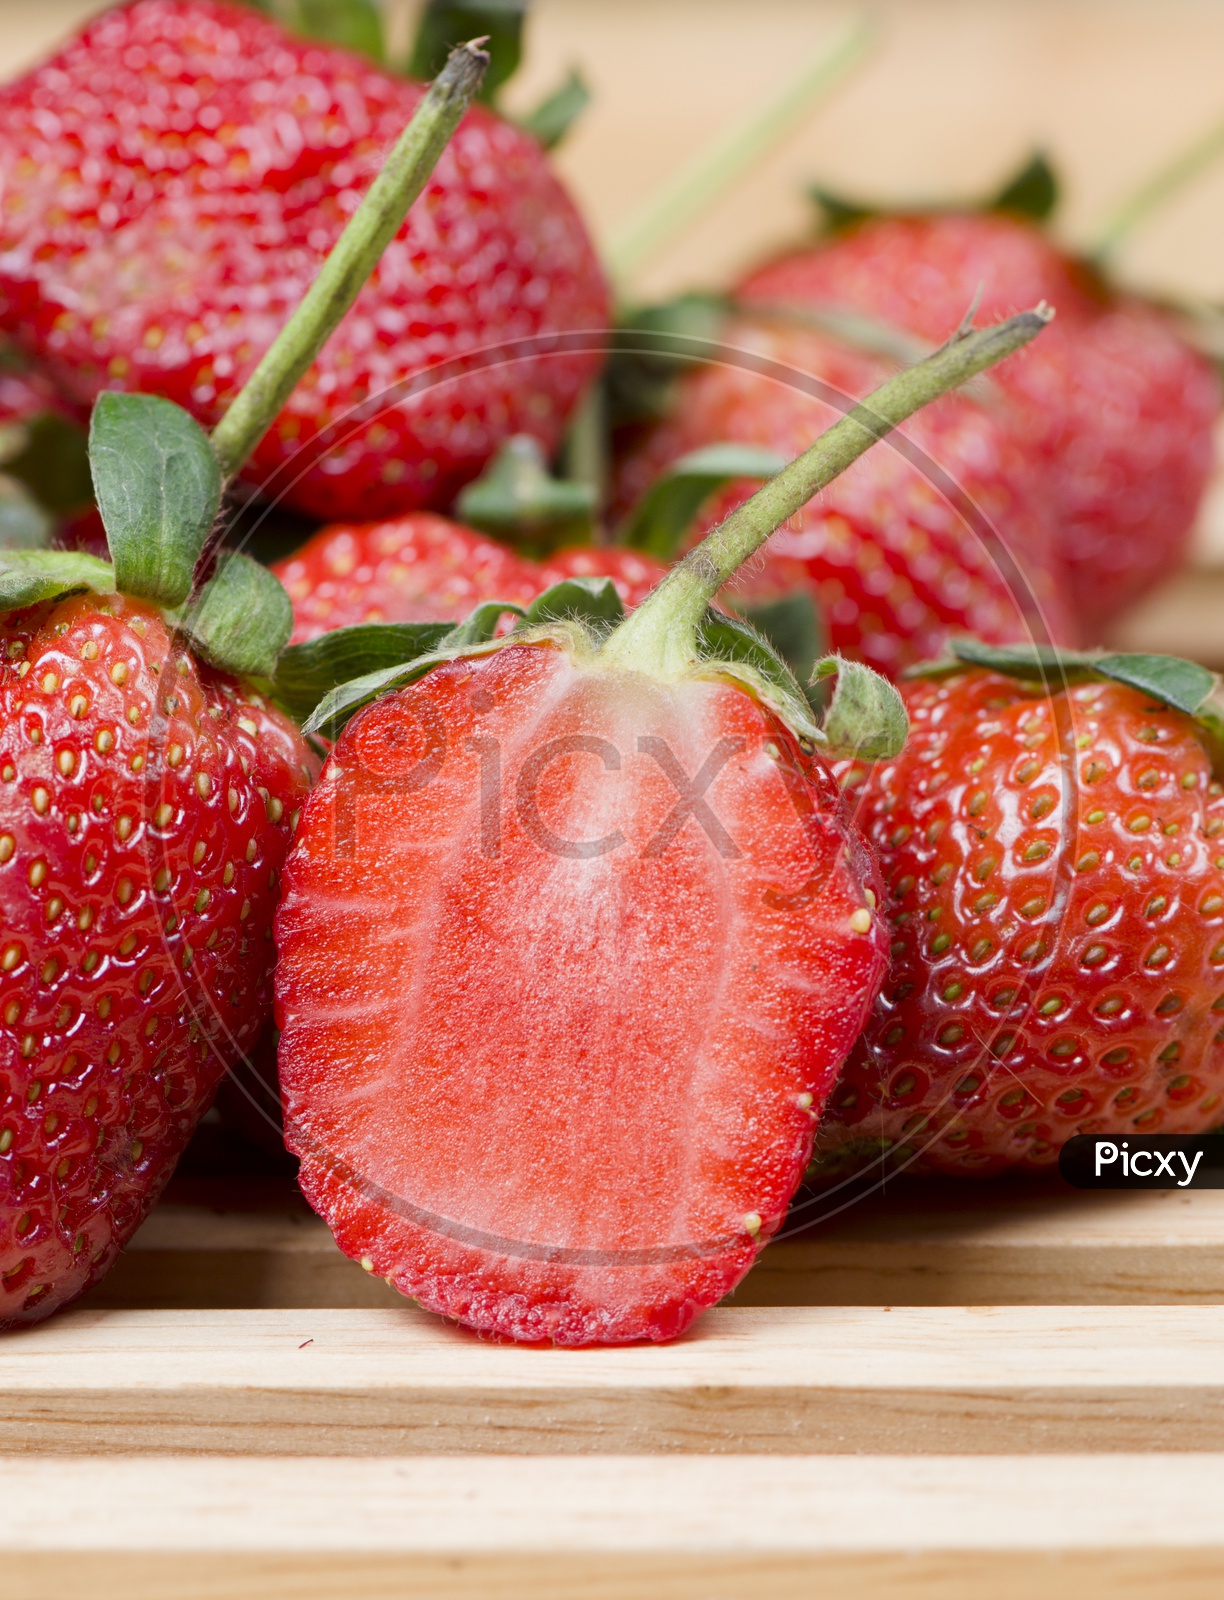 Yummy Strawberries on Wooden Background